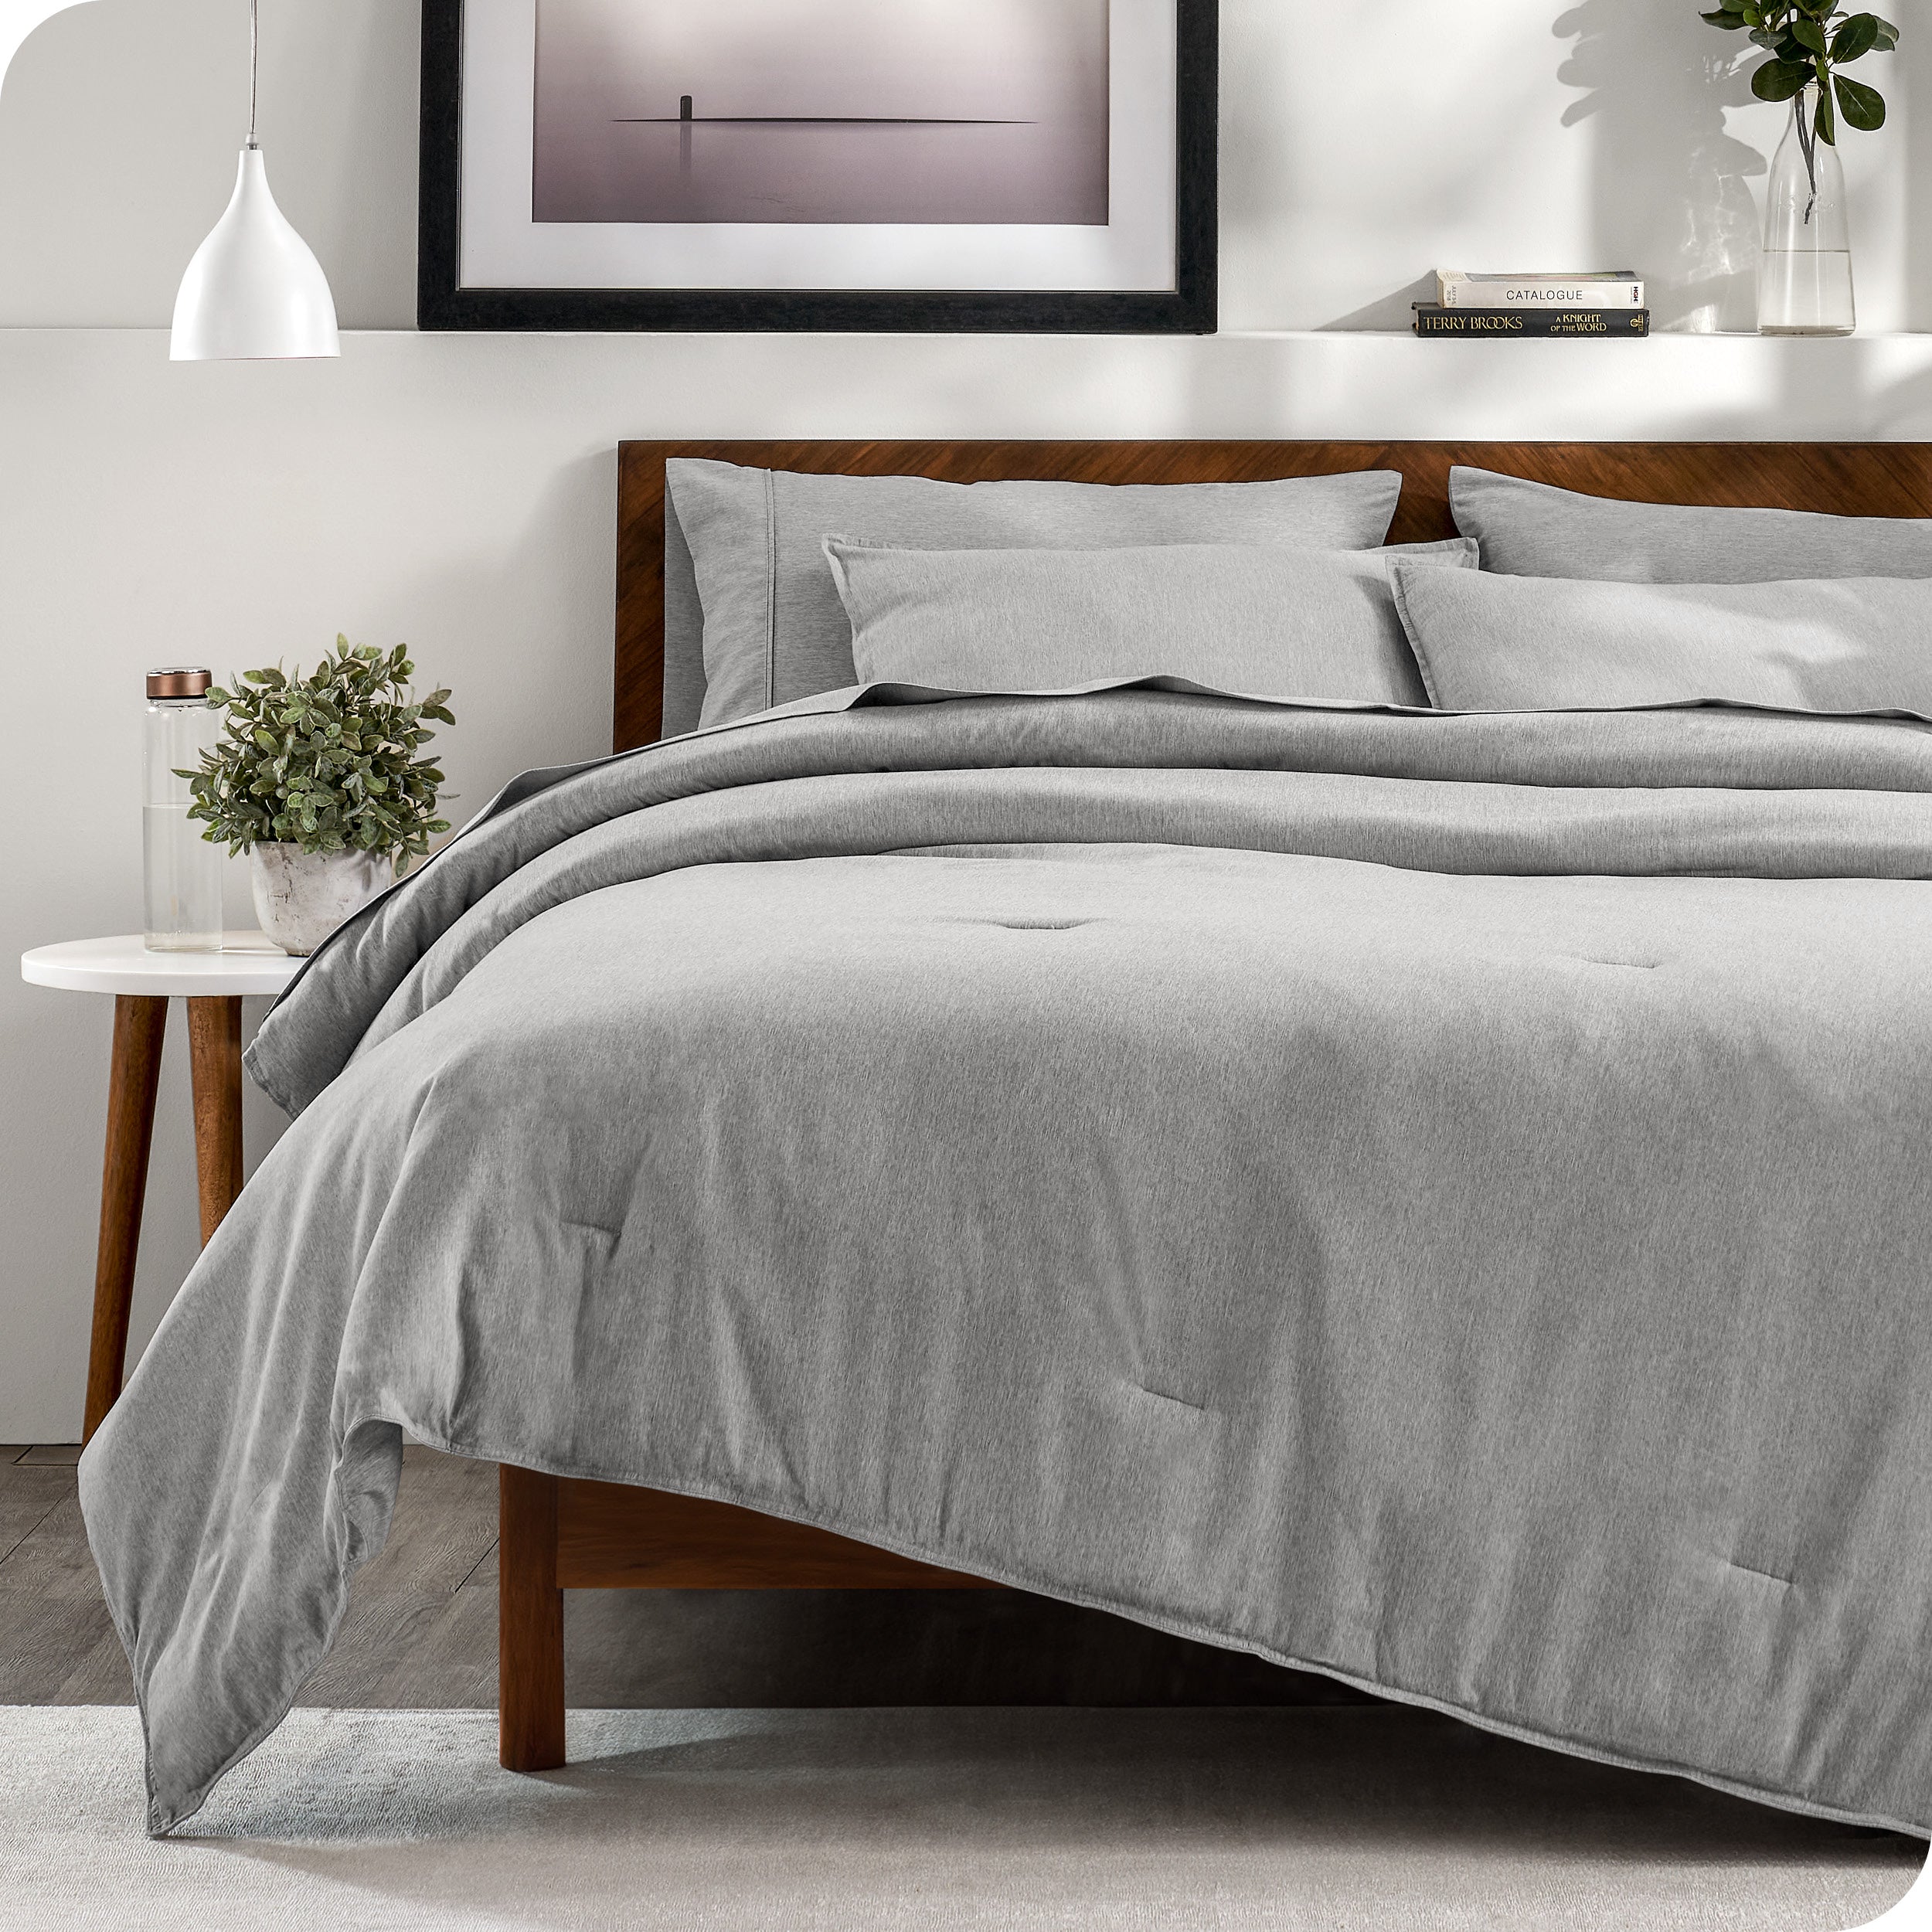 Modern bedroom with a heather grey complete bedding set on the bed